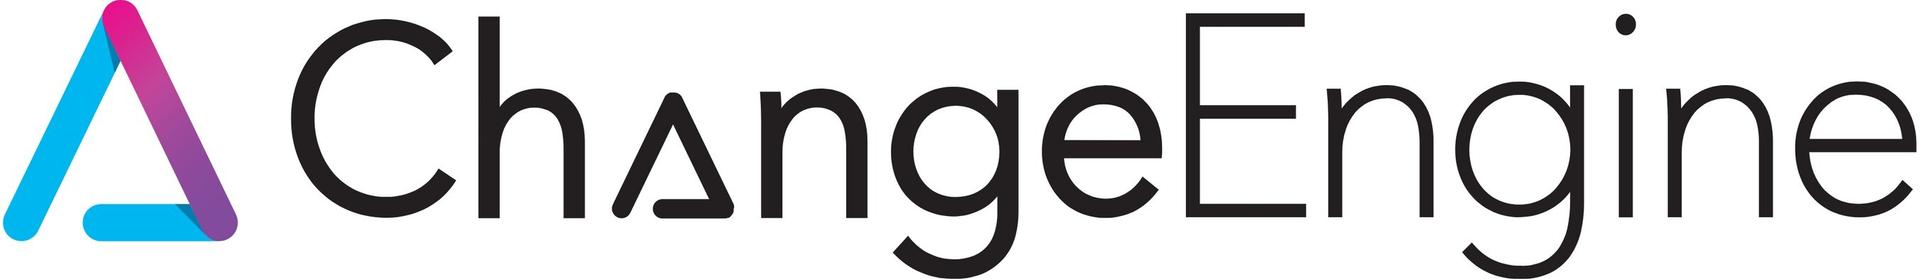 ChangeEngine Secures $10 Million Series A Funding To Bring AI-Powered CX Innovation To The Employee Experience